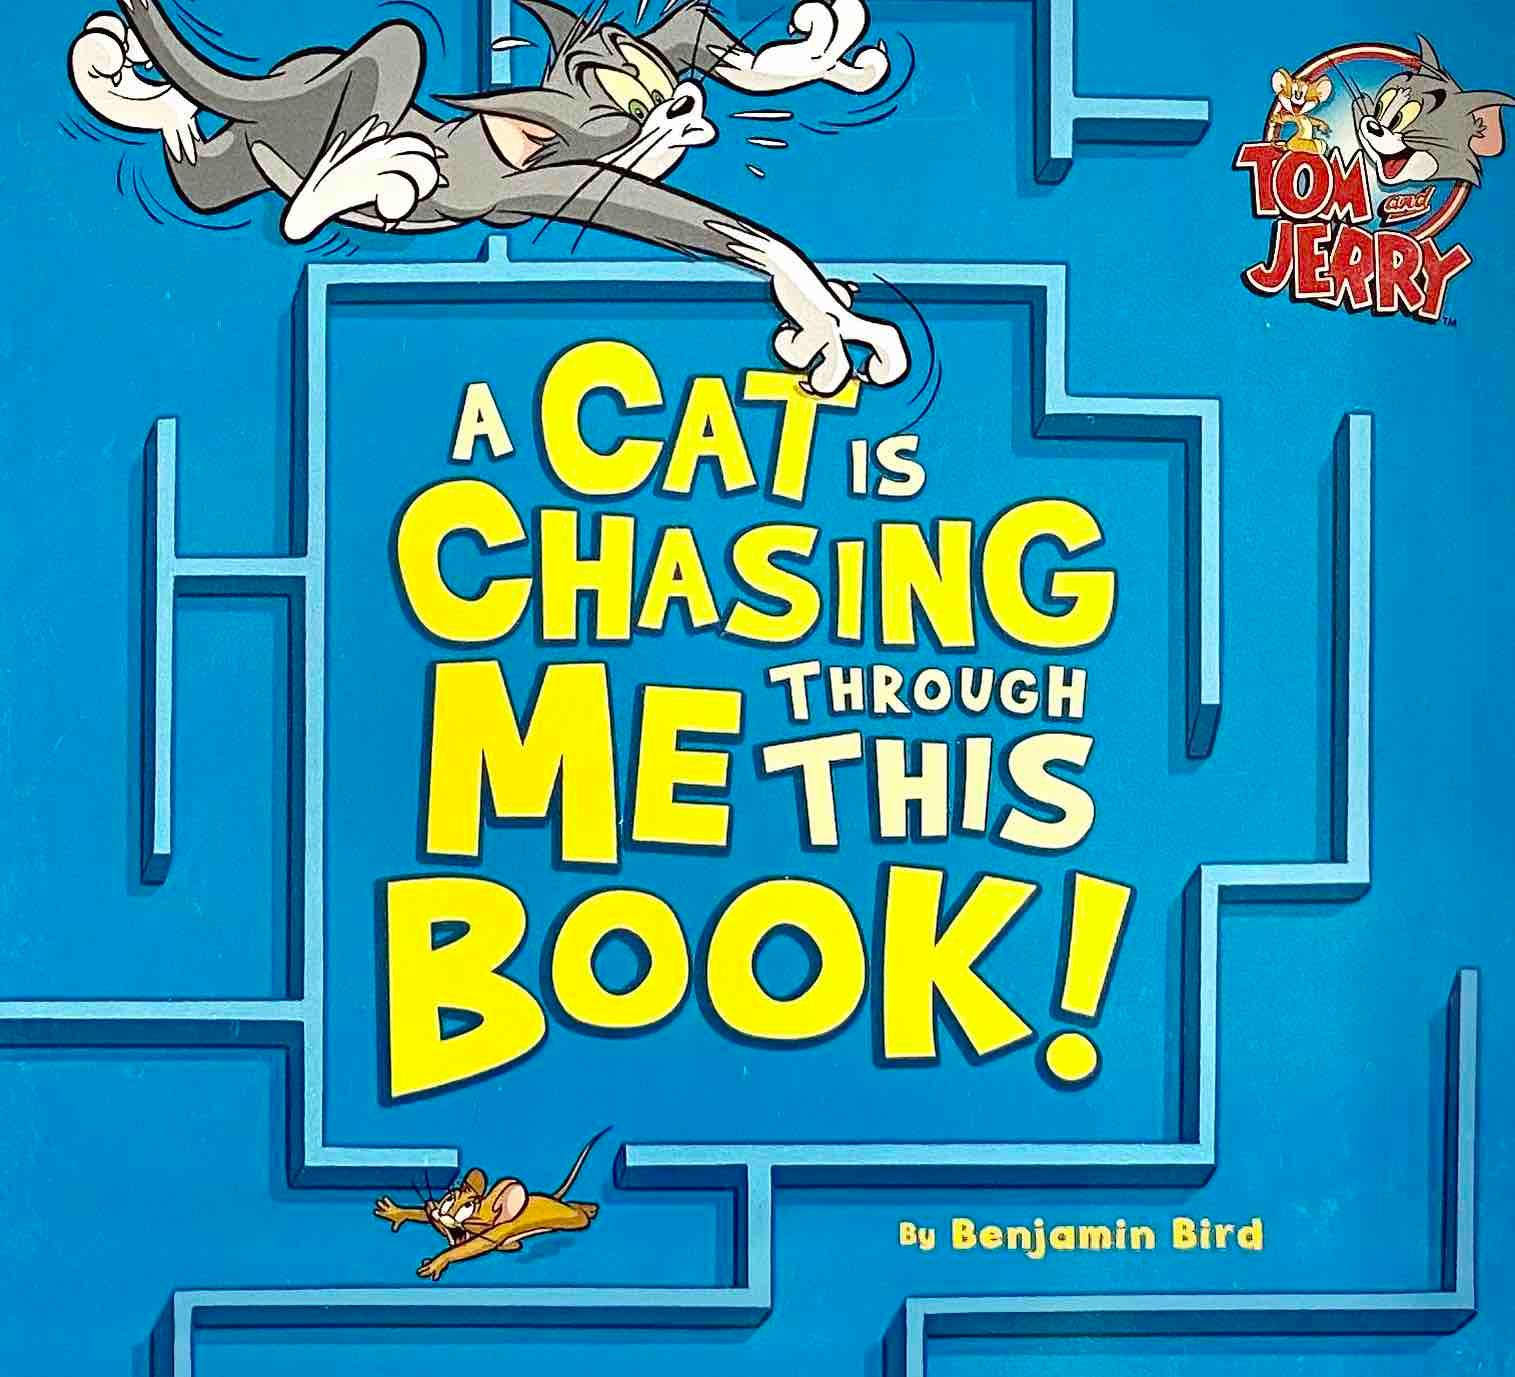 A Cat is Chasing Through Me This Book - Spectrawide Bookstore